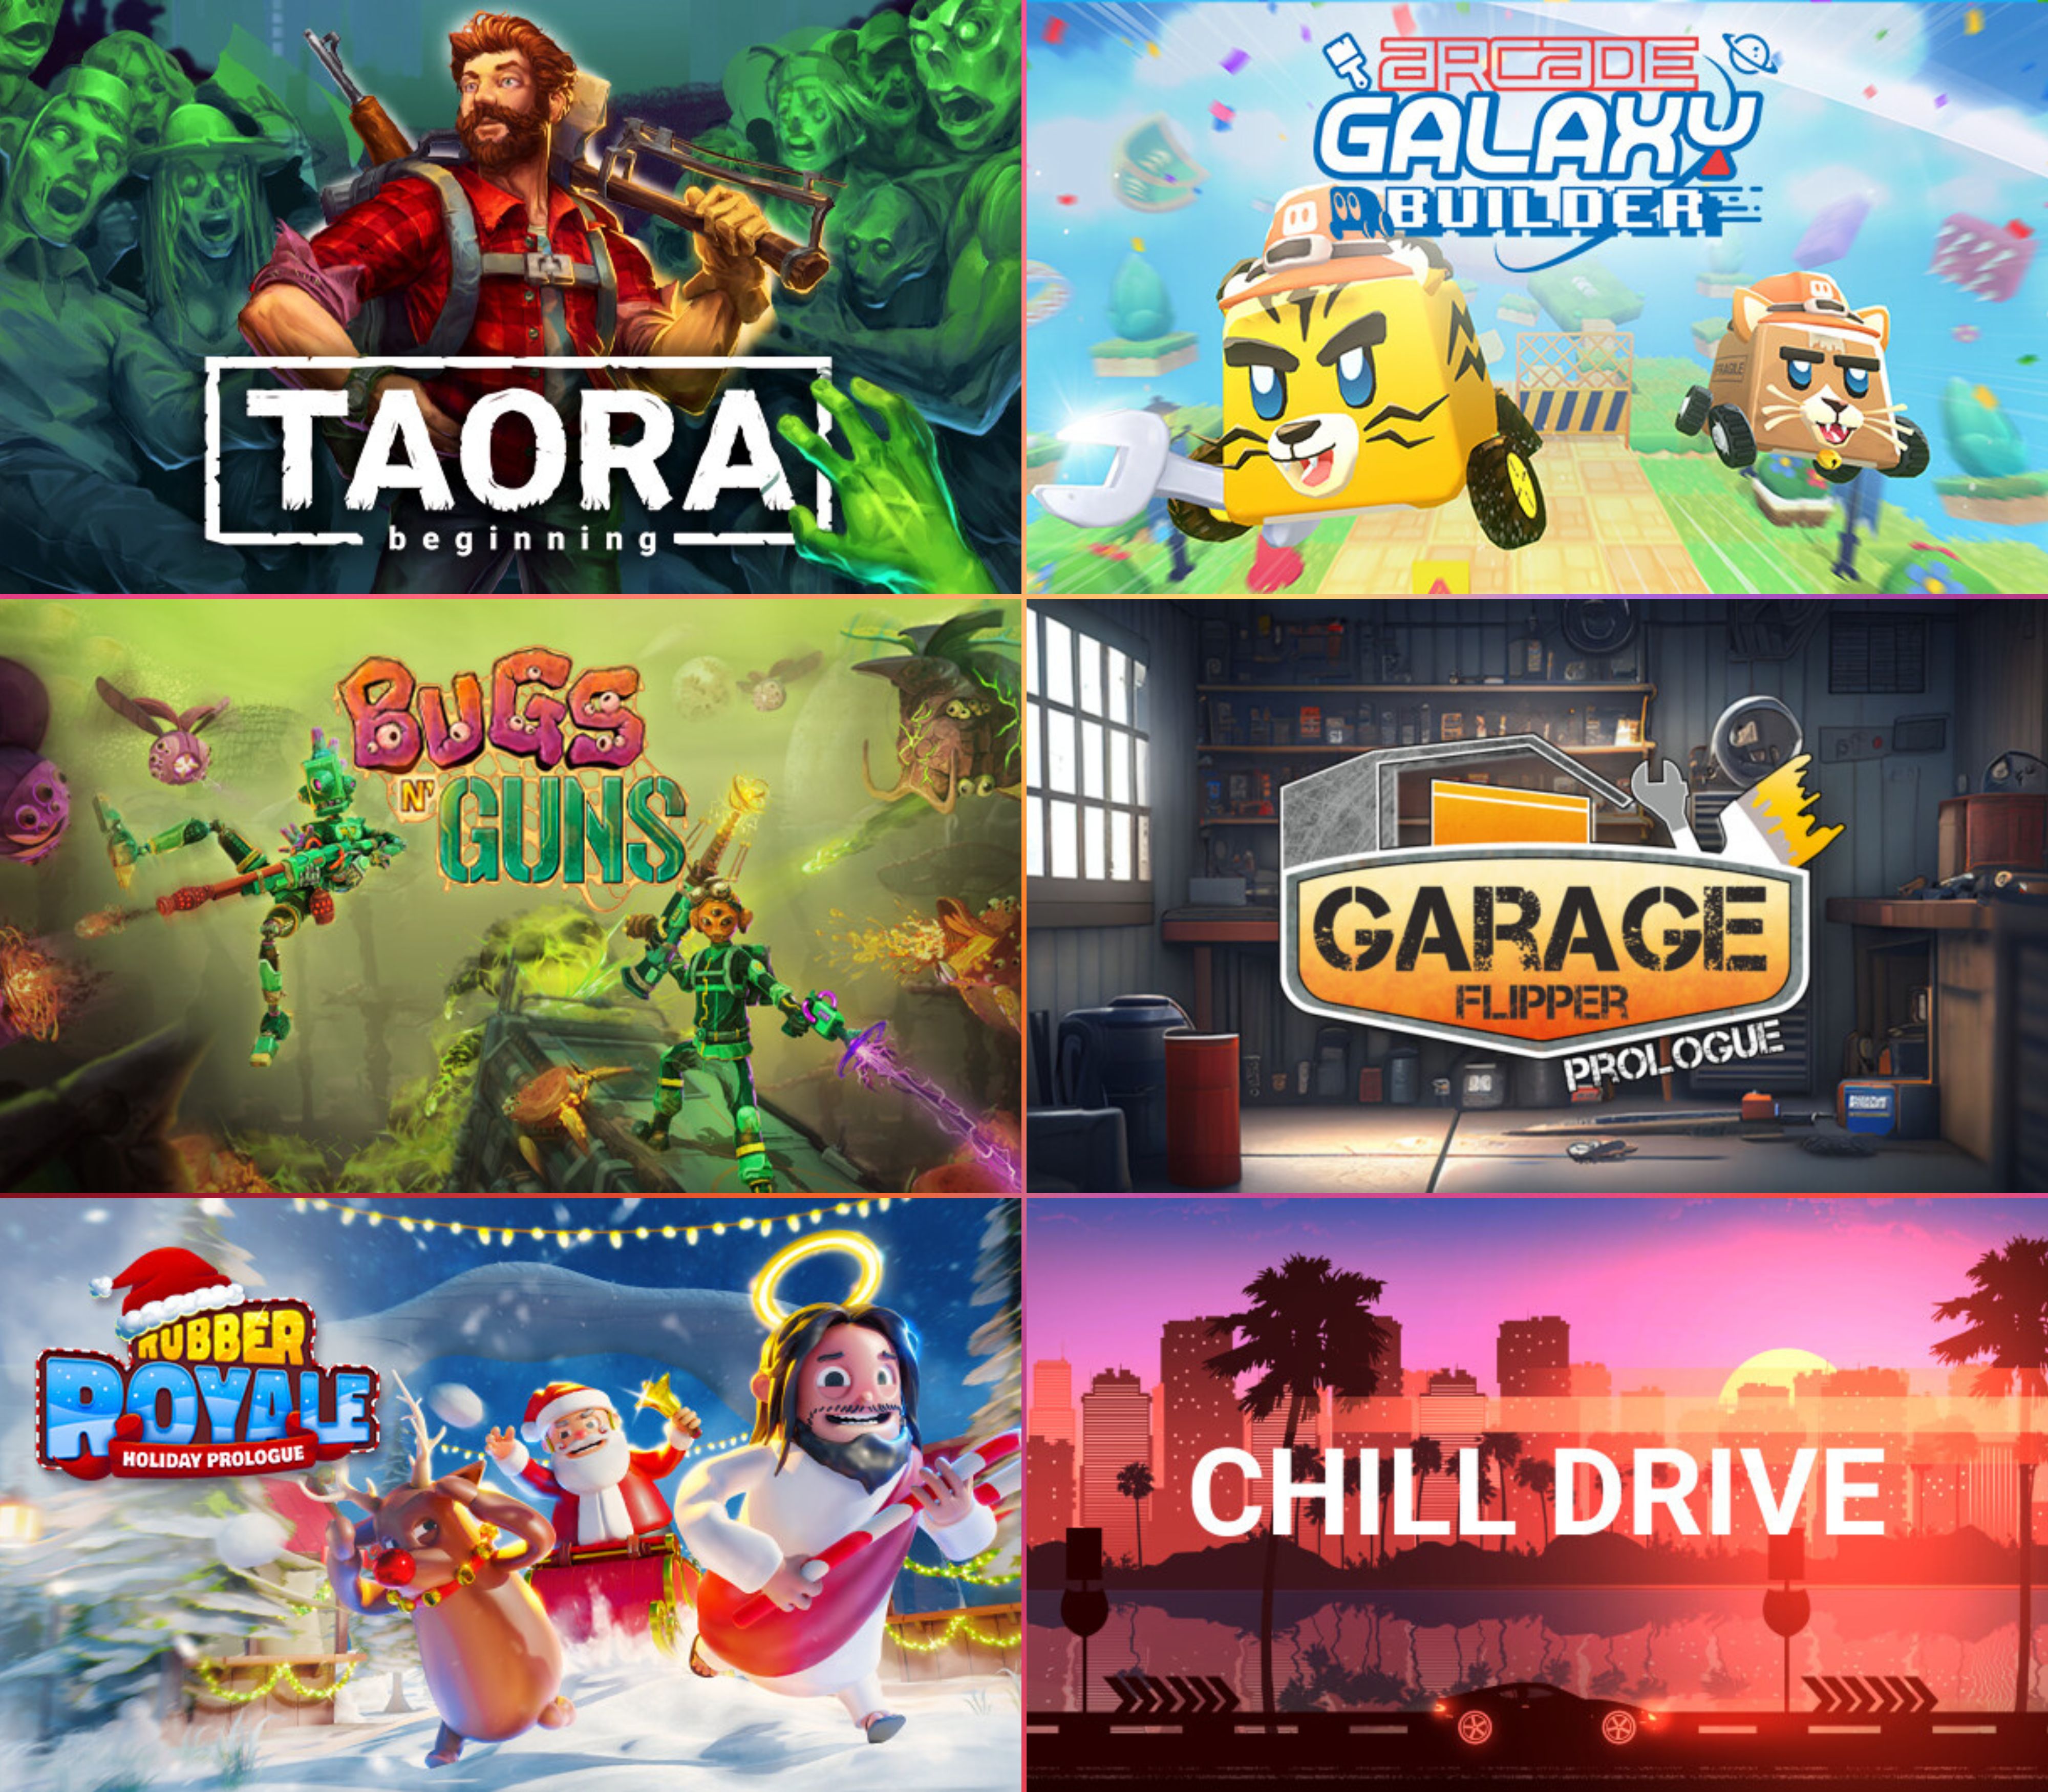 Best New Free Games on Steam (July 4th 2023)